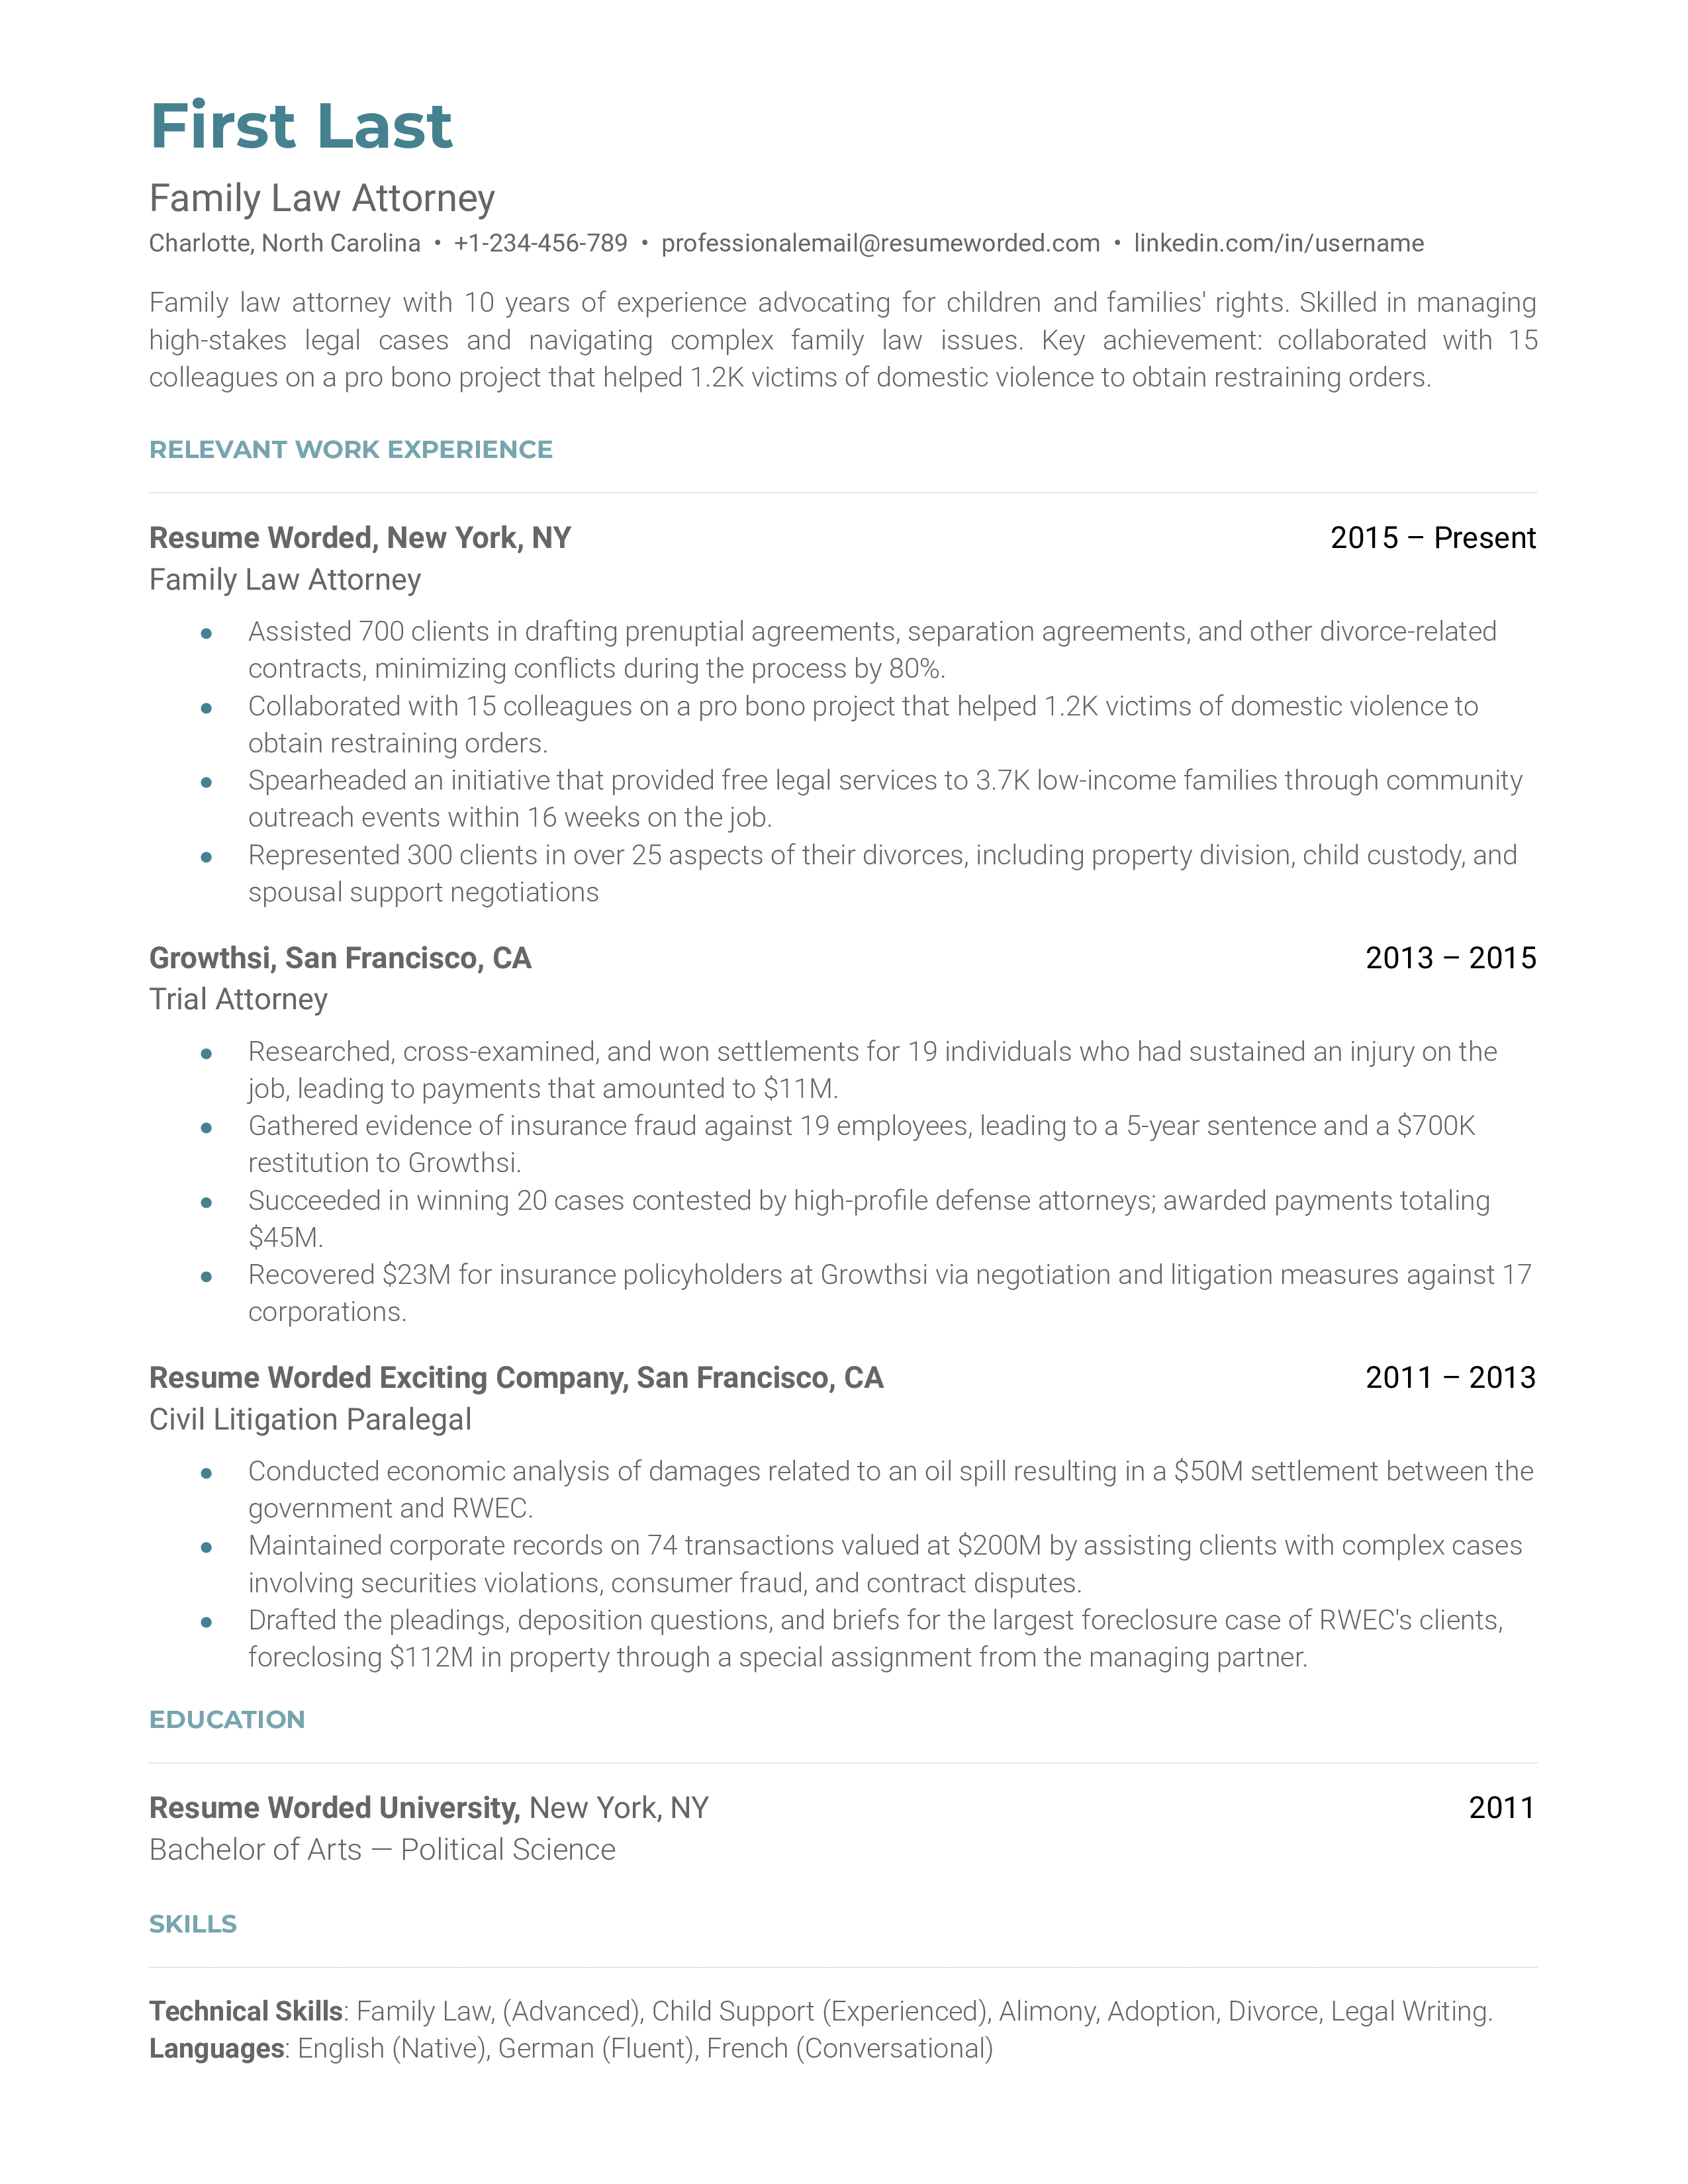 A family law attorney resume sample that highlights the applicant’s skill section and strong achievements.